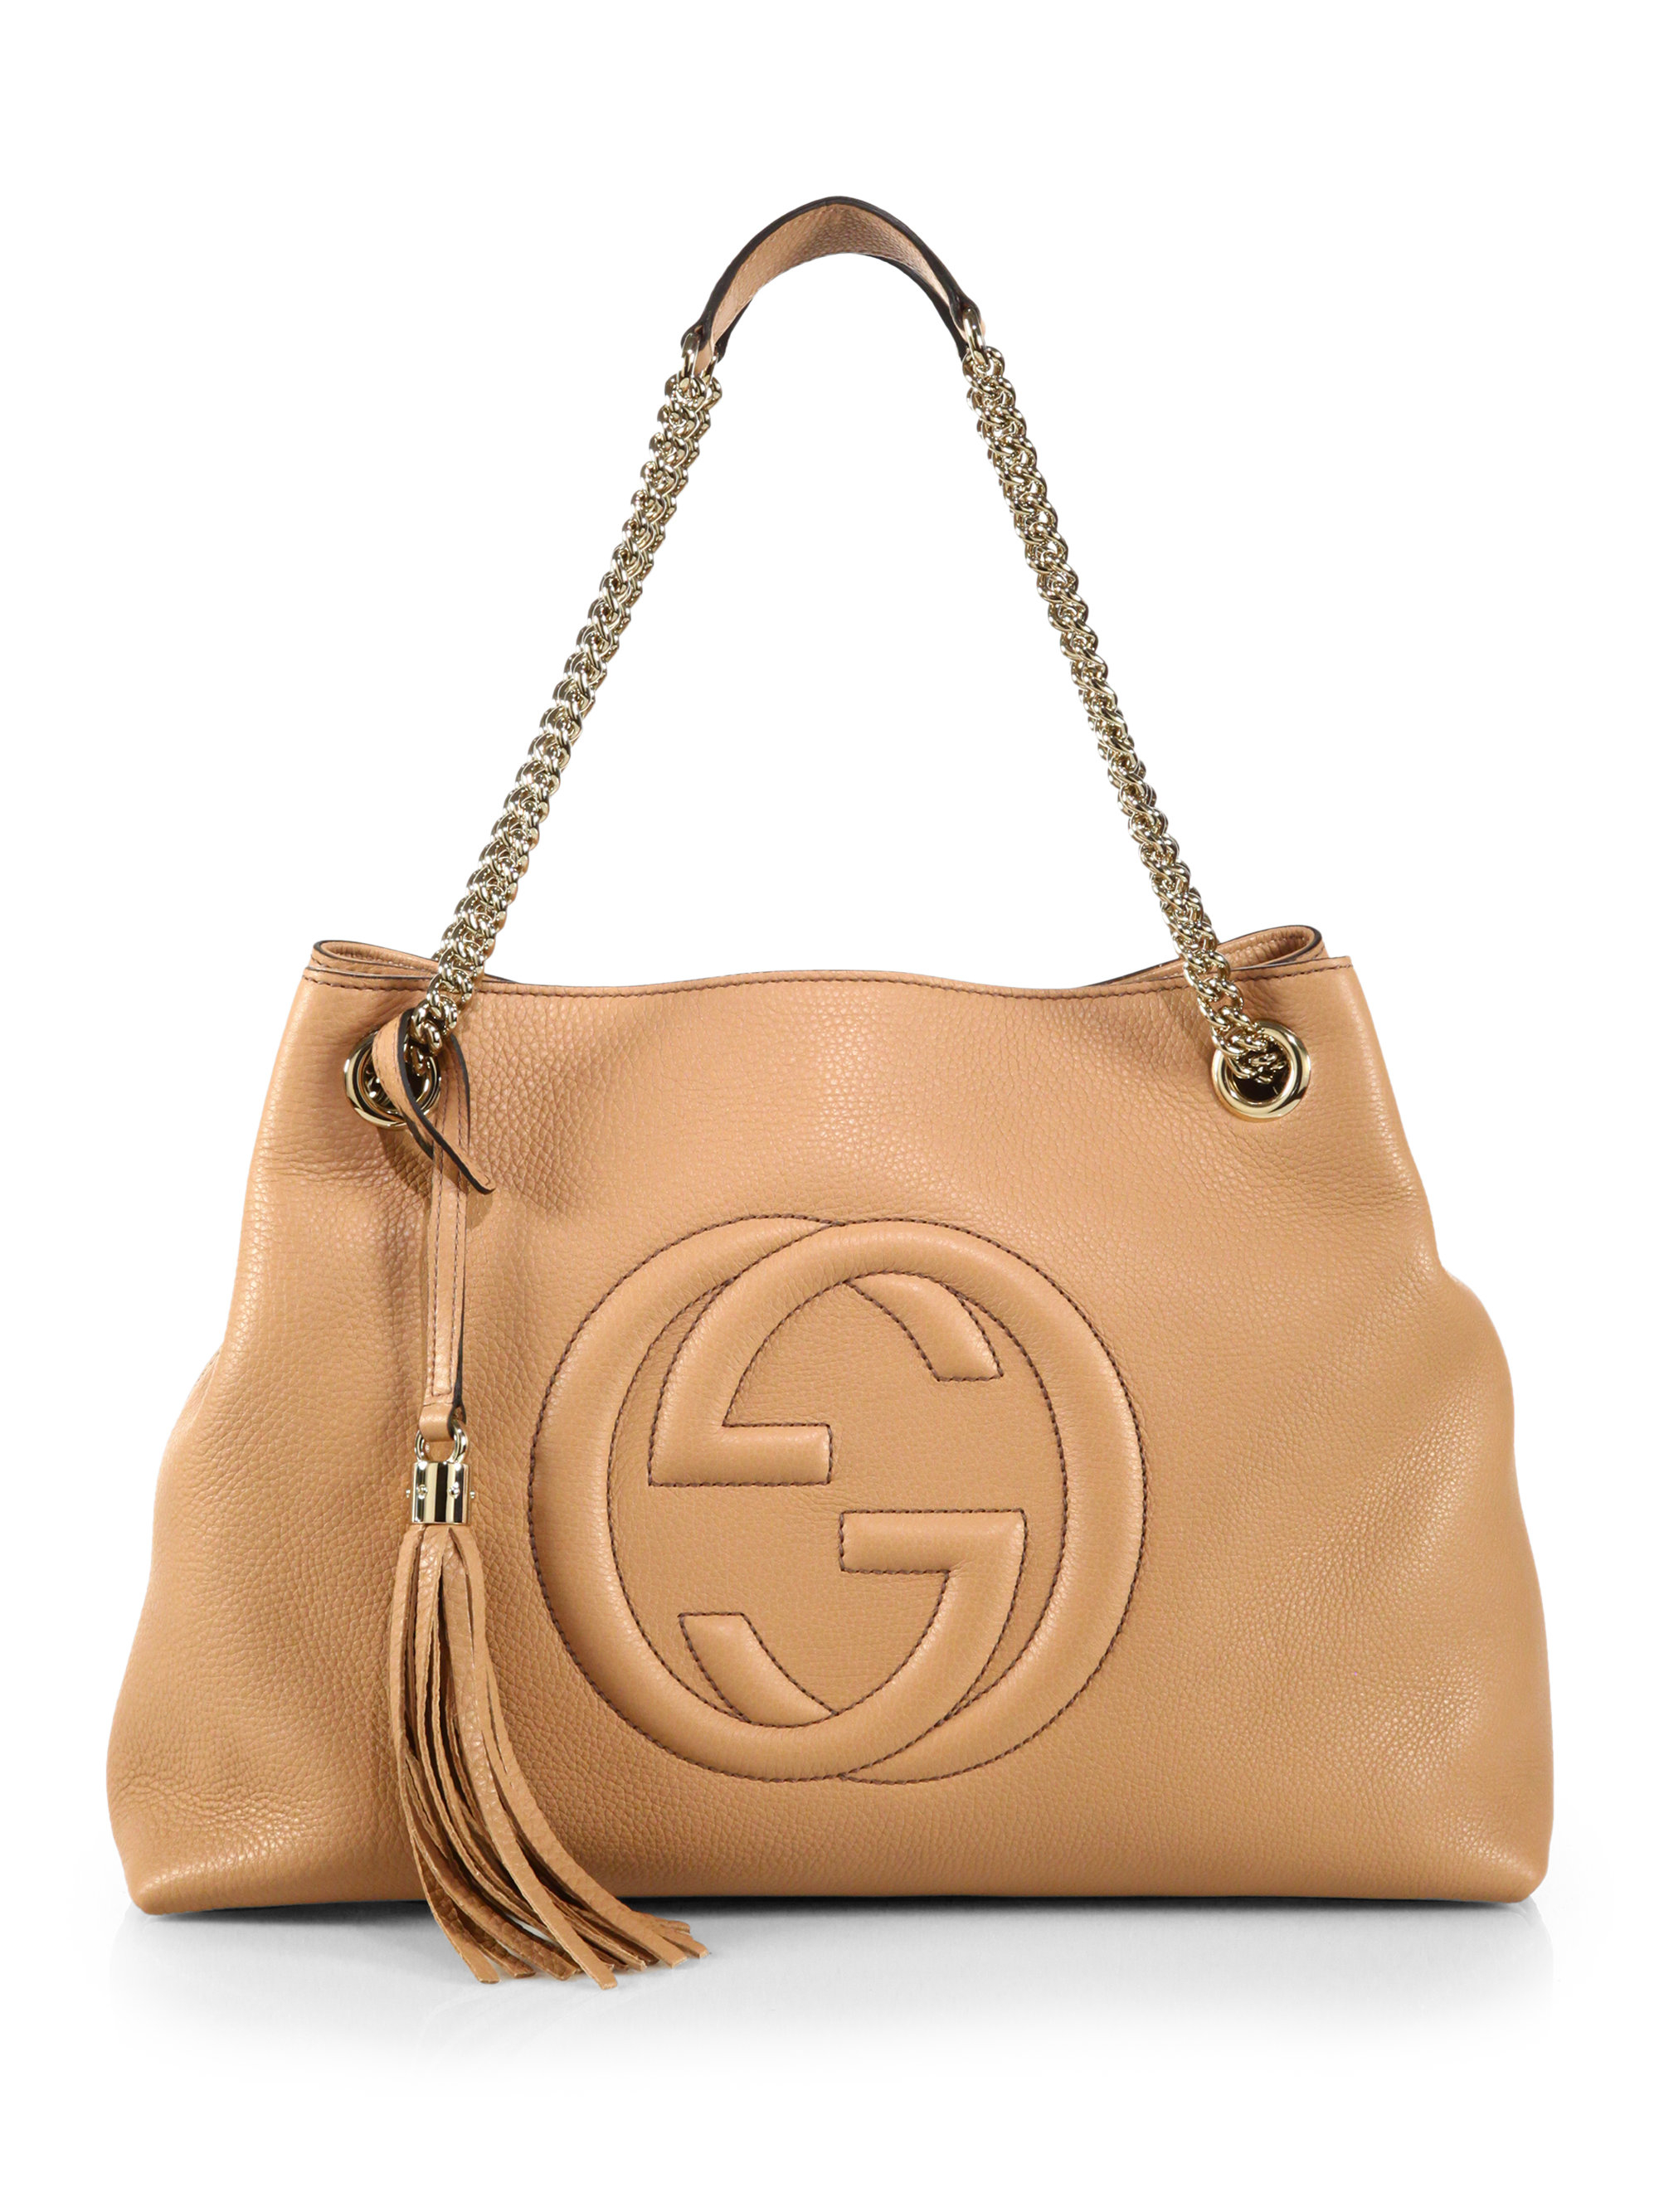 Lyst - Gucci Soho Leather Shoulder Bag in Brown